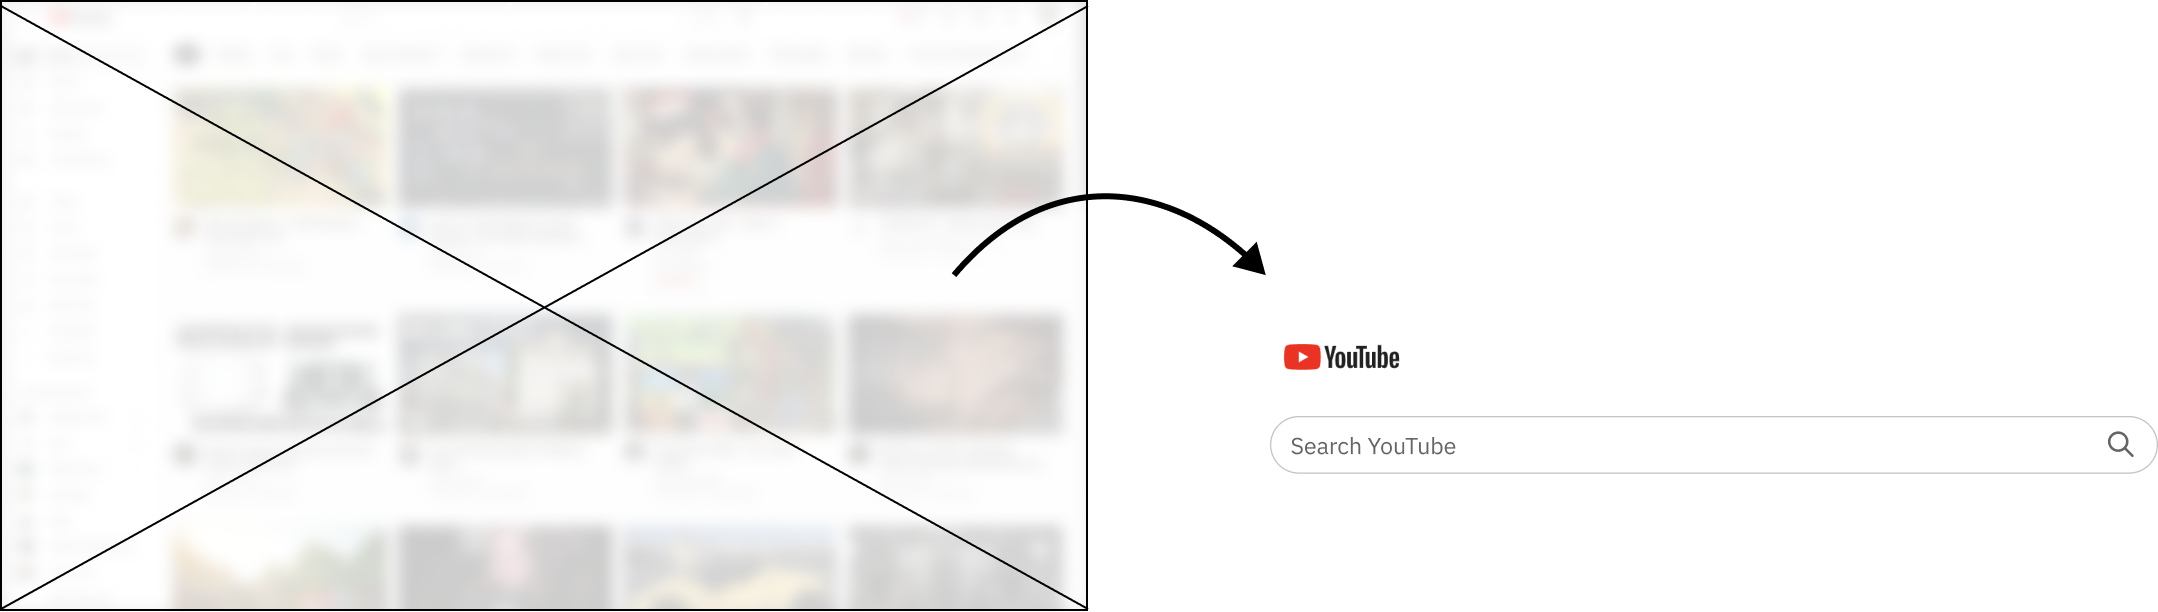 Simple Youtube Homepage Search